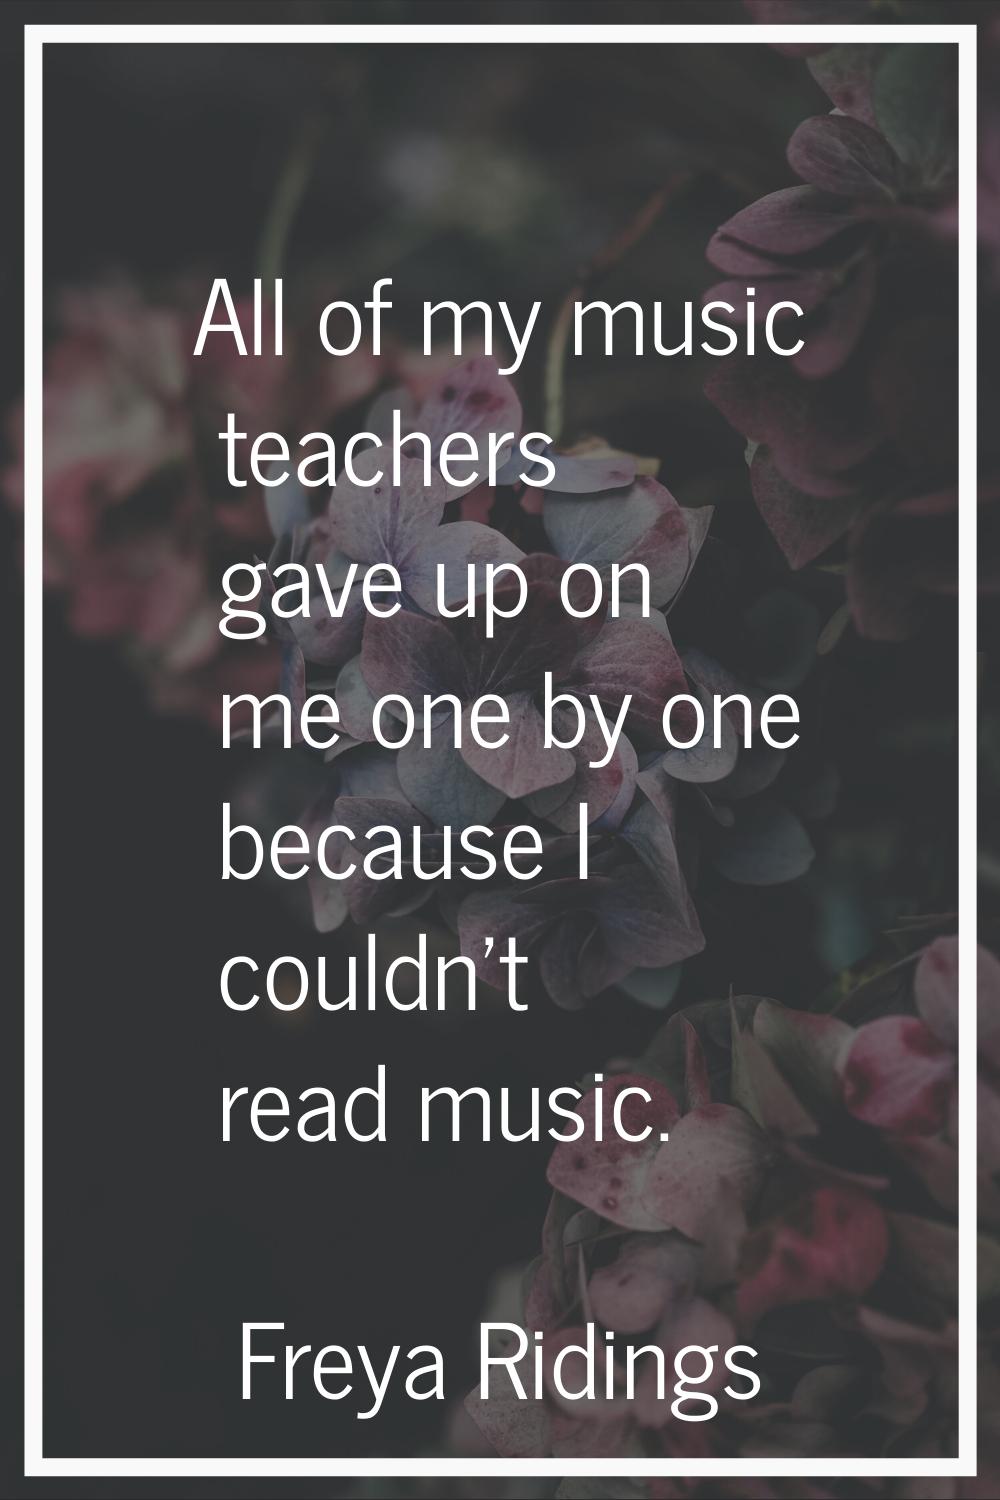 All of my music teachers gave up on me one by one because I couldn't read music.